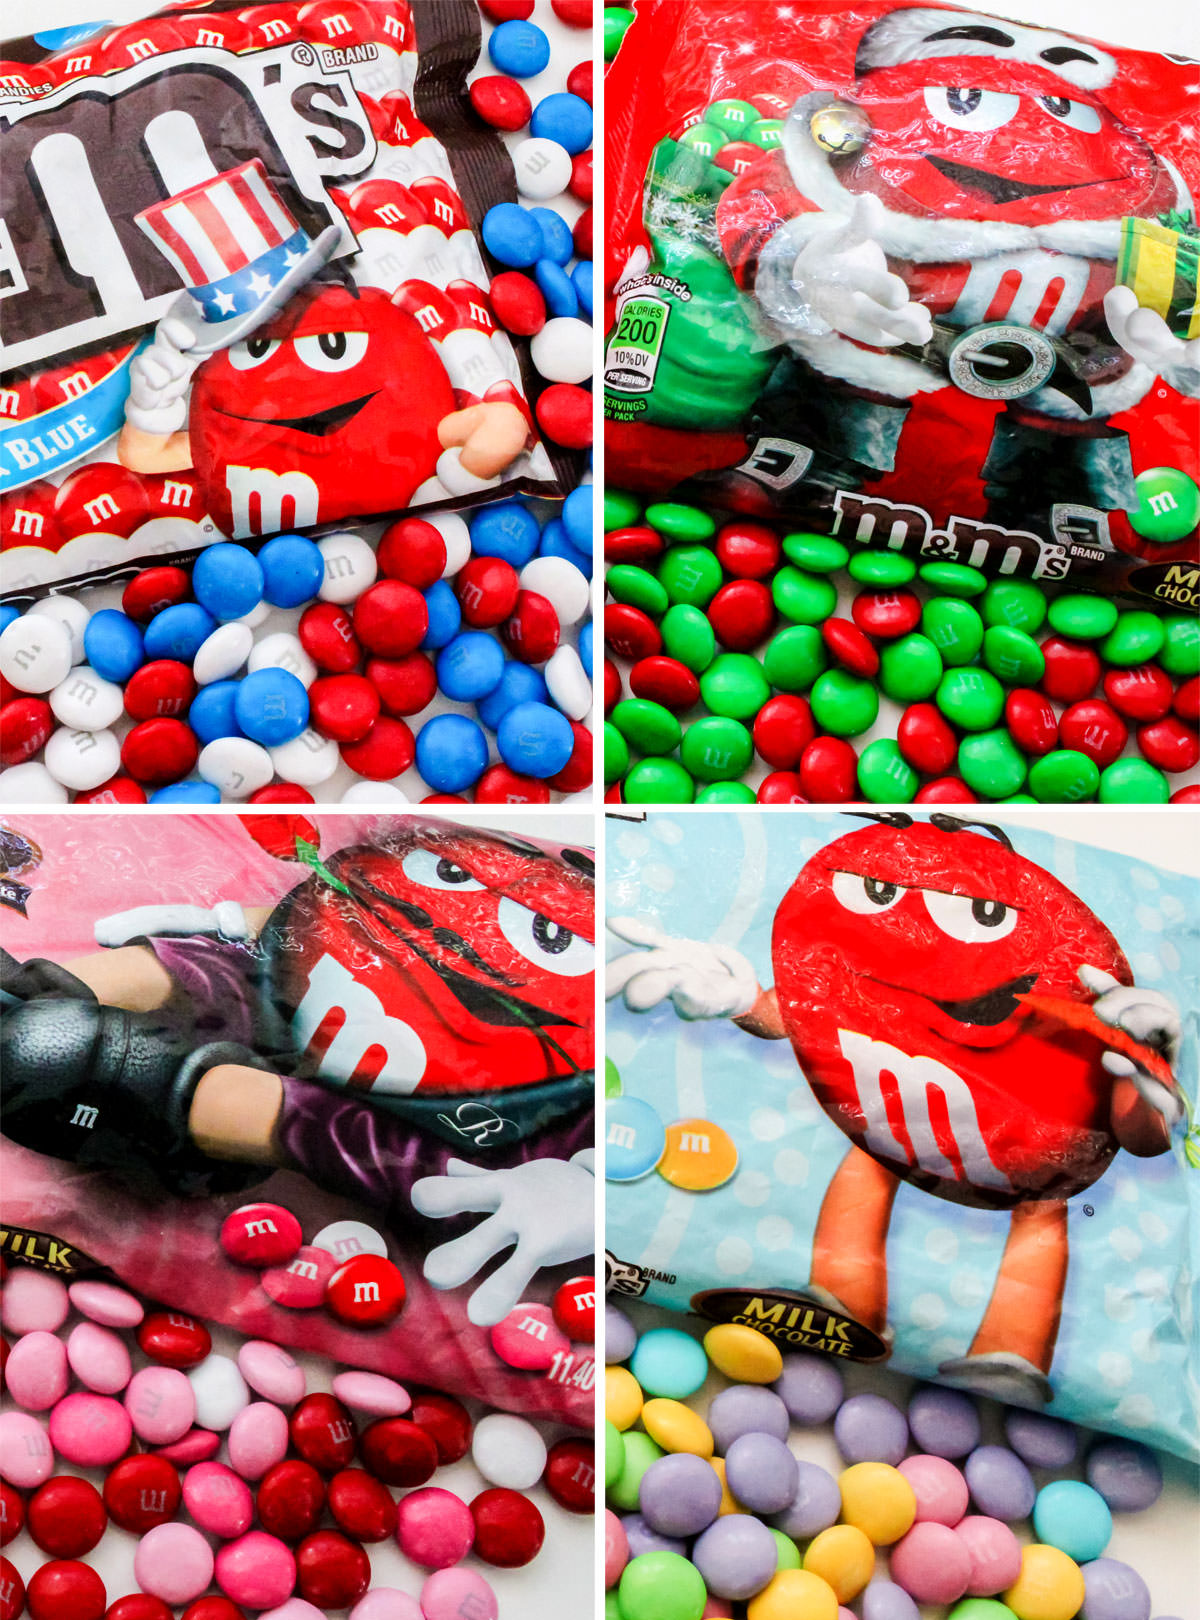 Collage image showing sample bags of the Holiday mix M&M's series.